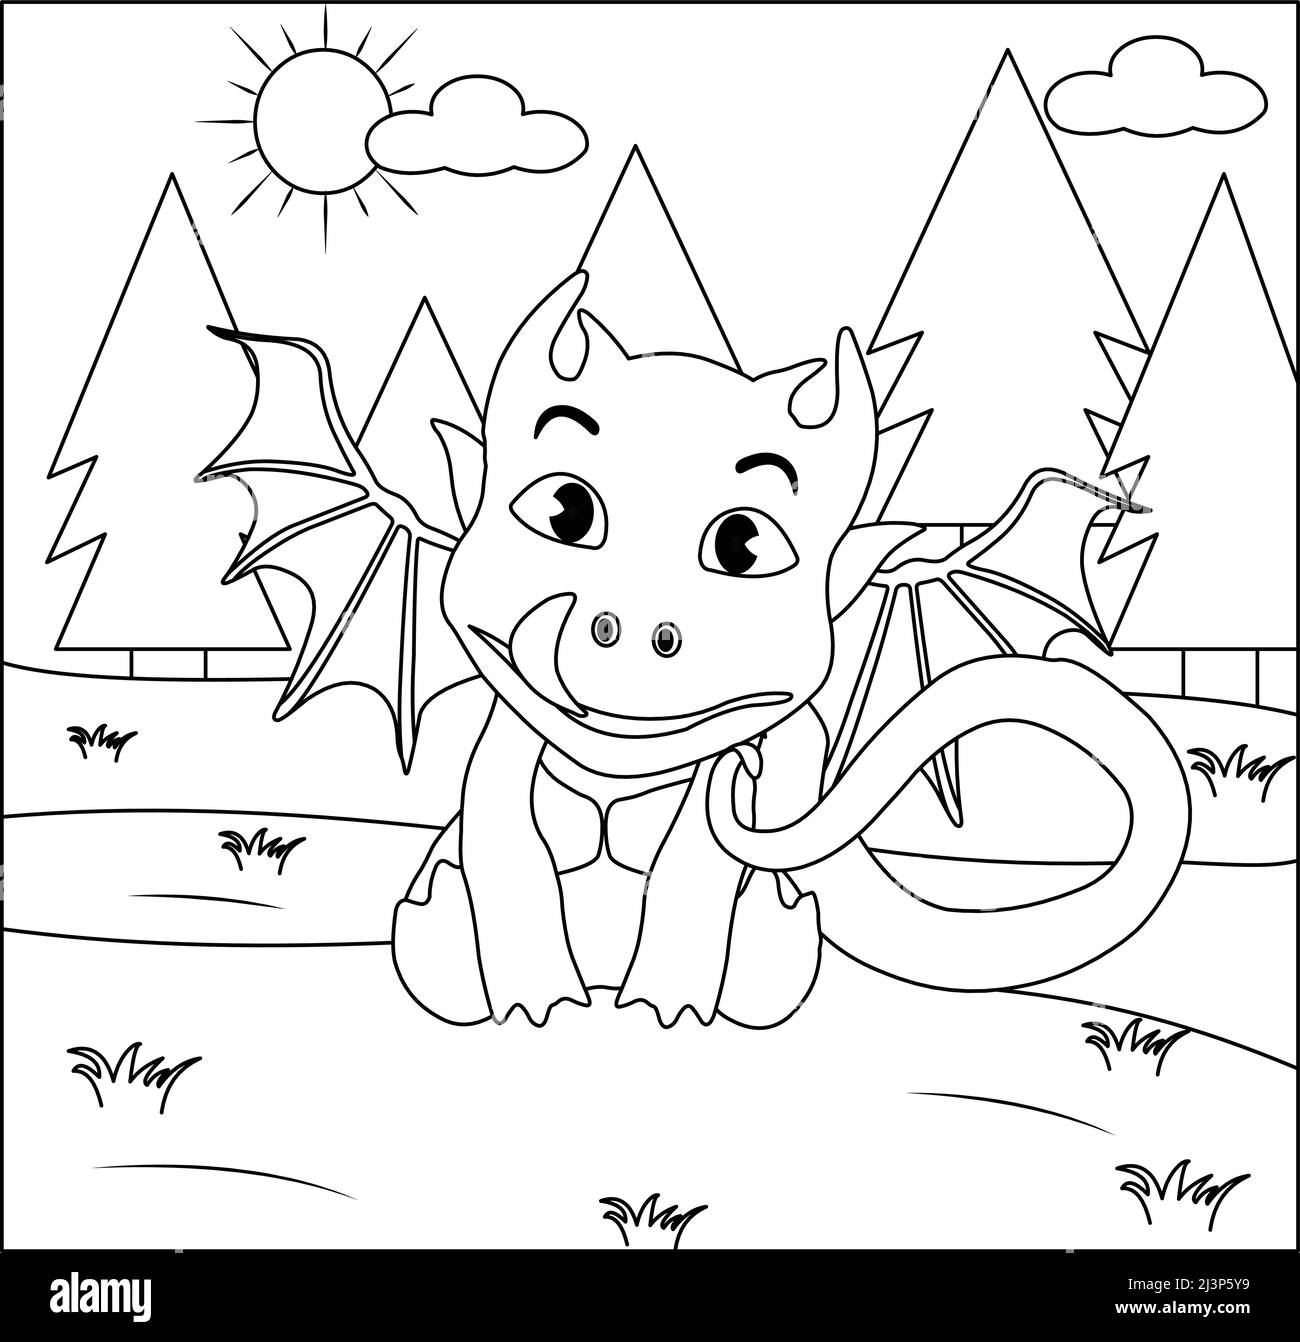 (Dragon Coloring Page: 8) Cute Dragon with nature, green grass, trees on background, vector black and white coloring page. Stock Vector